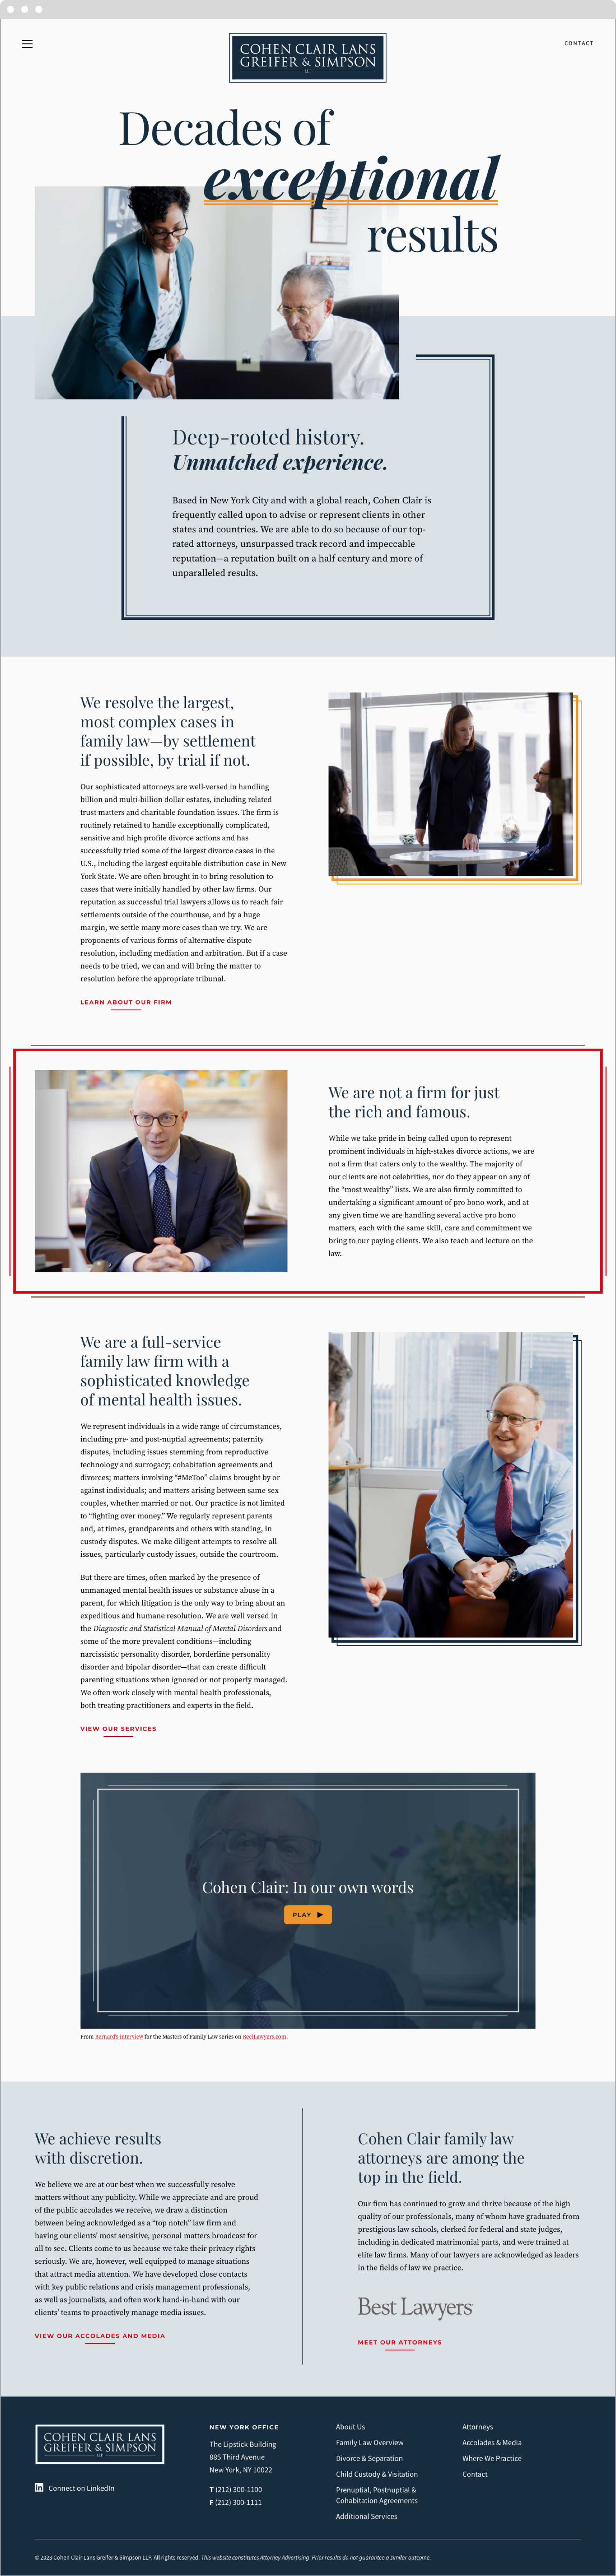 The Cohen Clair law firm’s web home page with text about the firm and images of its lawyers.